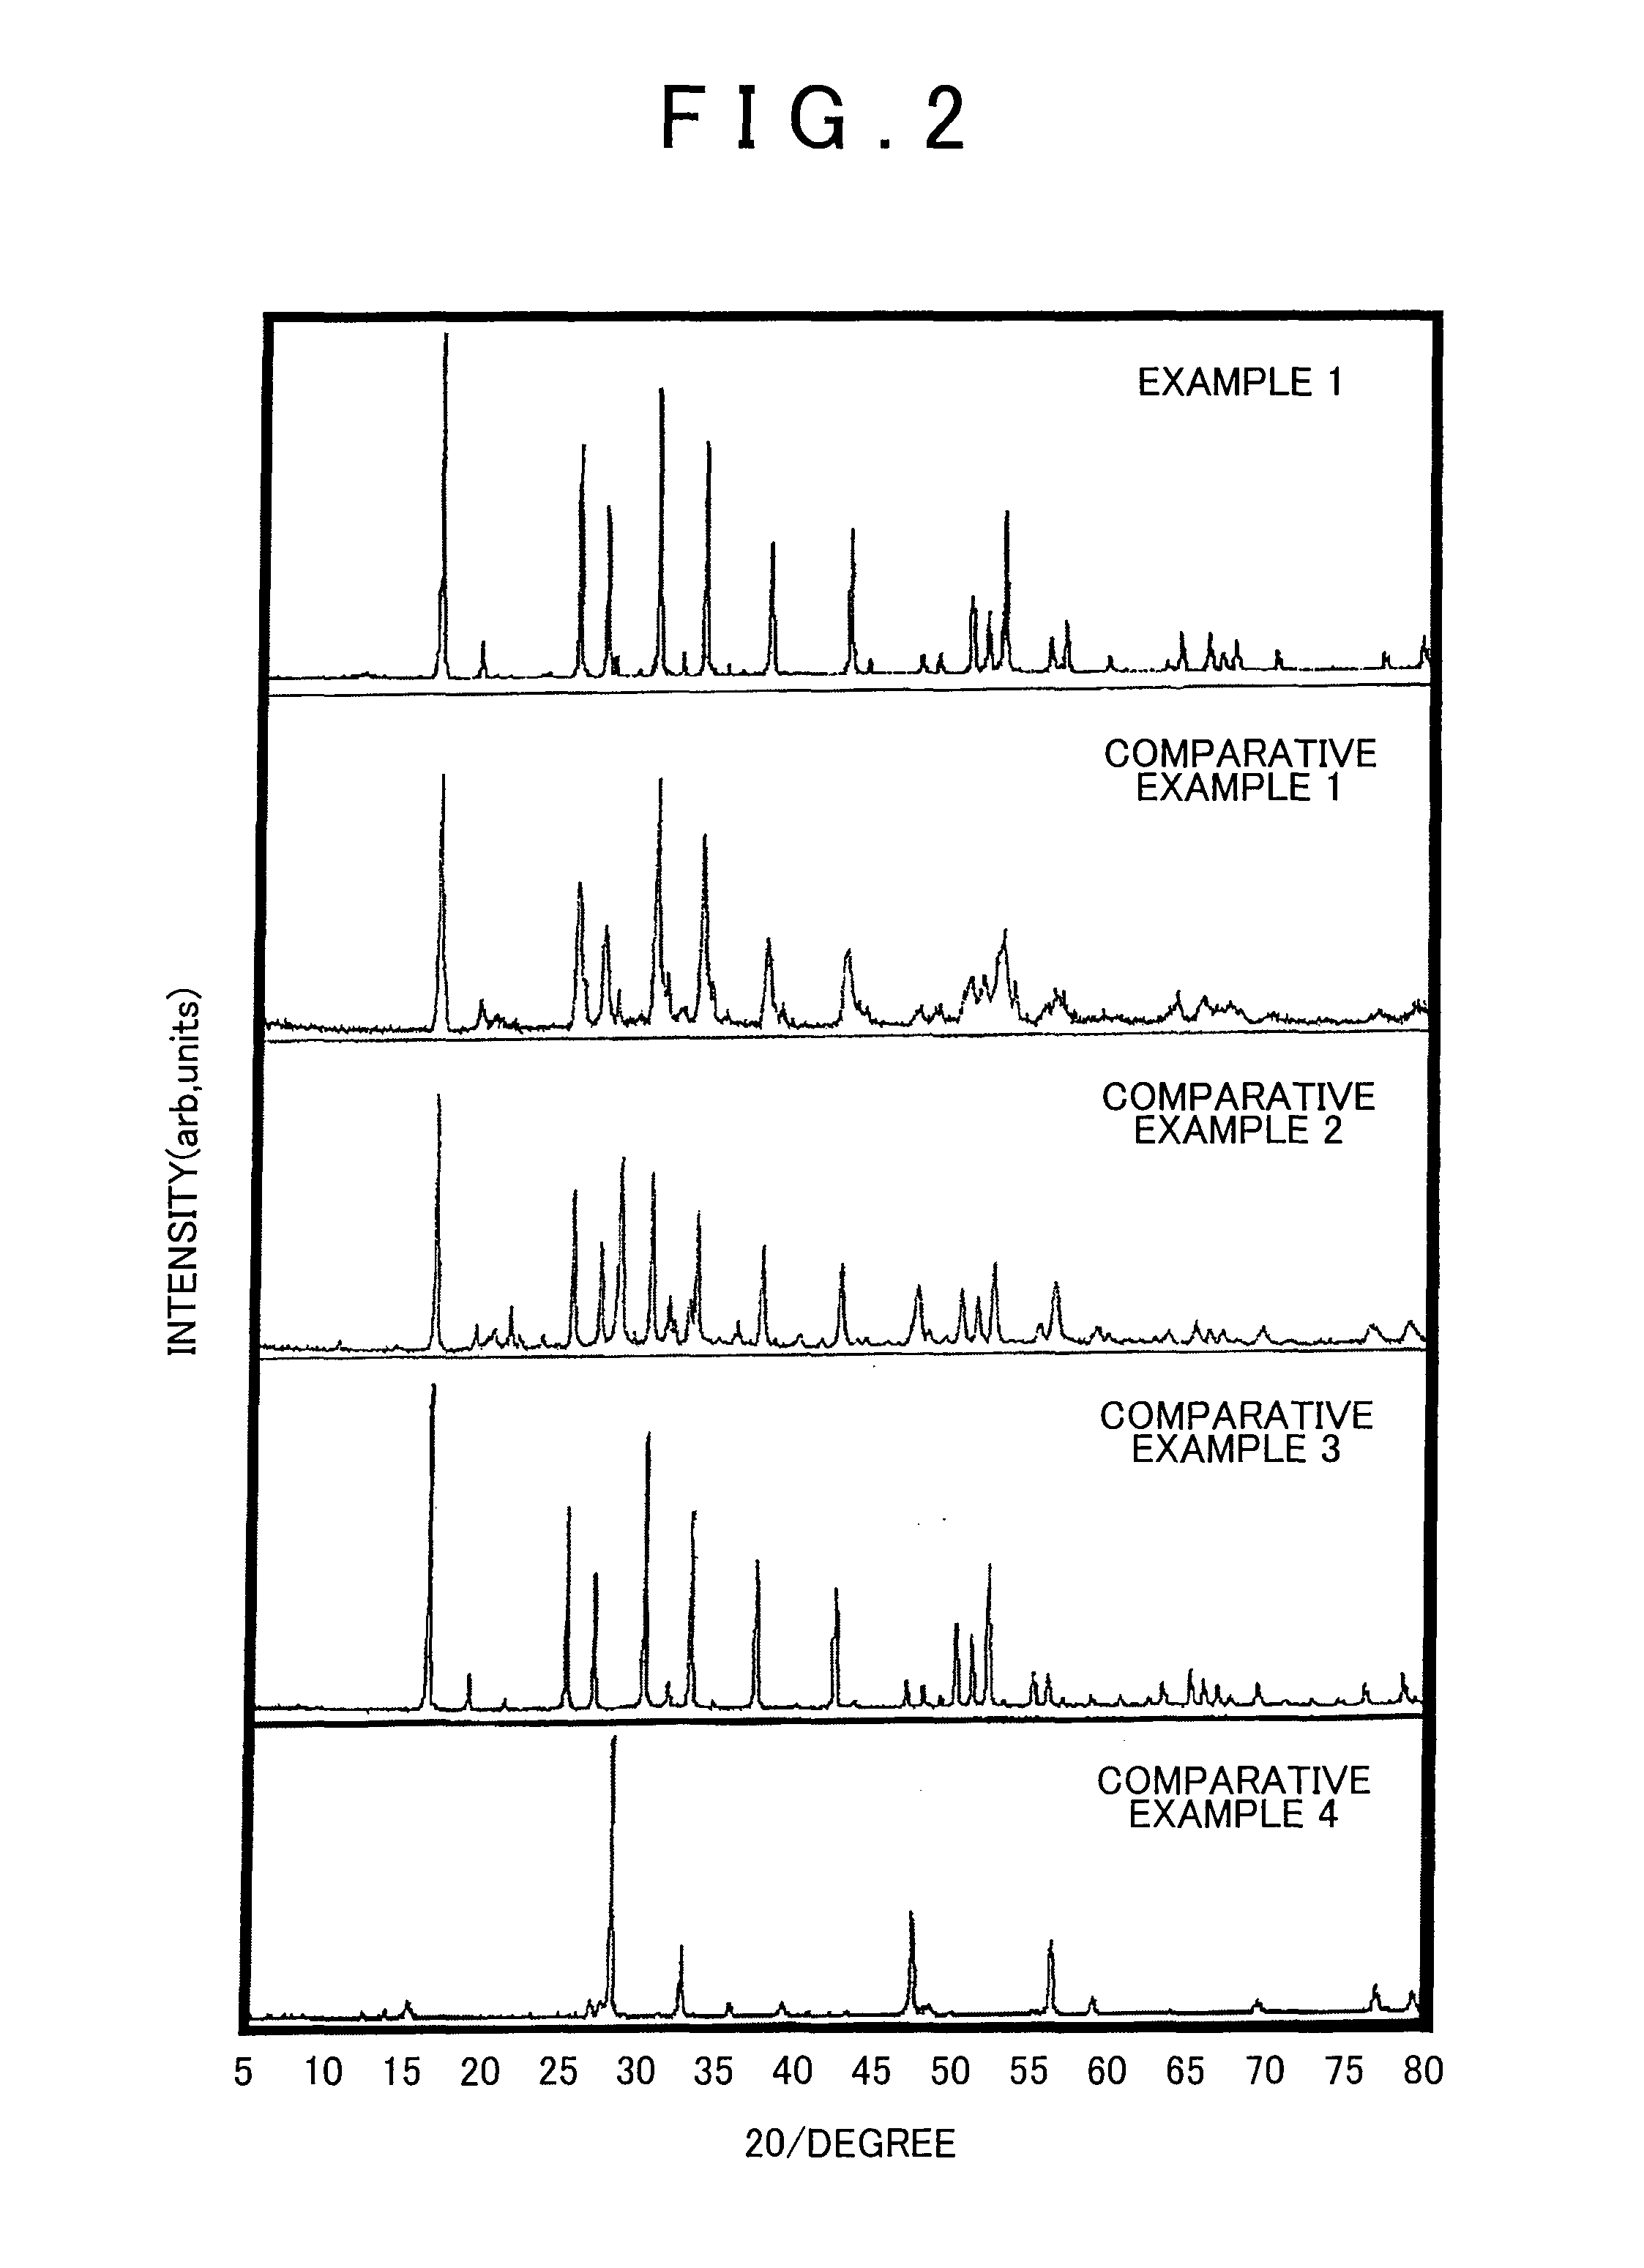 Garnet-type solid electrolyte, secondary battery containing garnet-type solid electrolyte, and method of producing garnet-type solid electrolyte